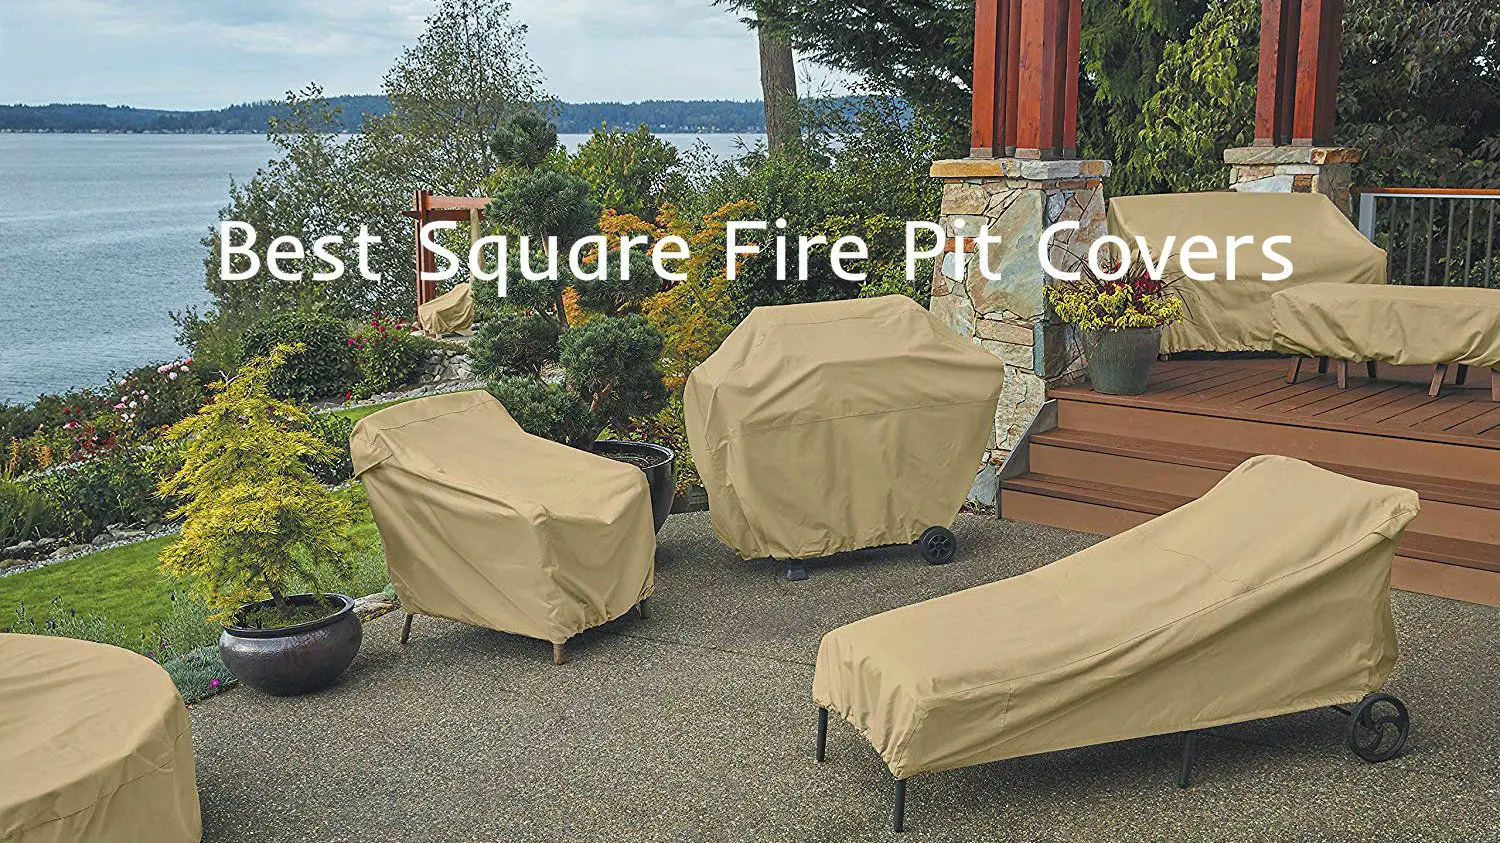 Best Square Fire Pit Covers Heatwhiz Com, Square Fire Pit Cover 30 X 30